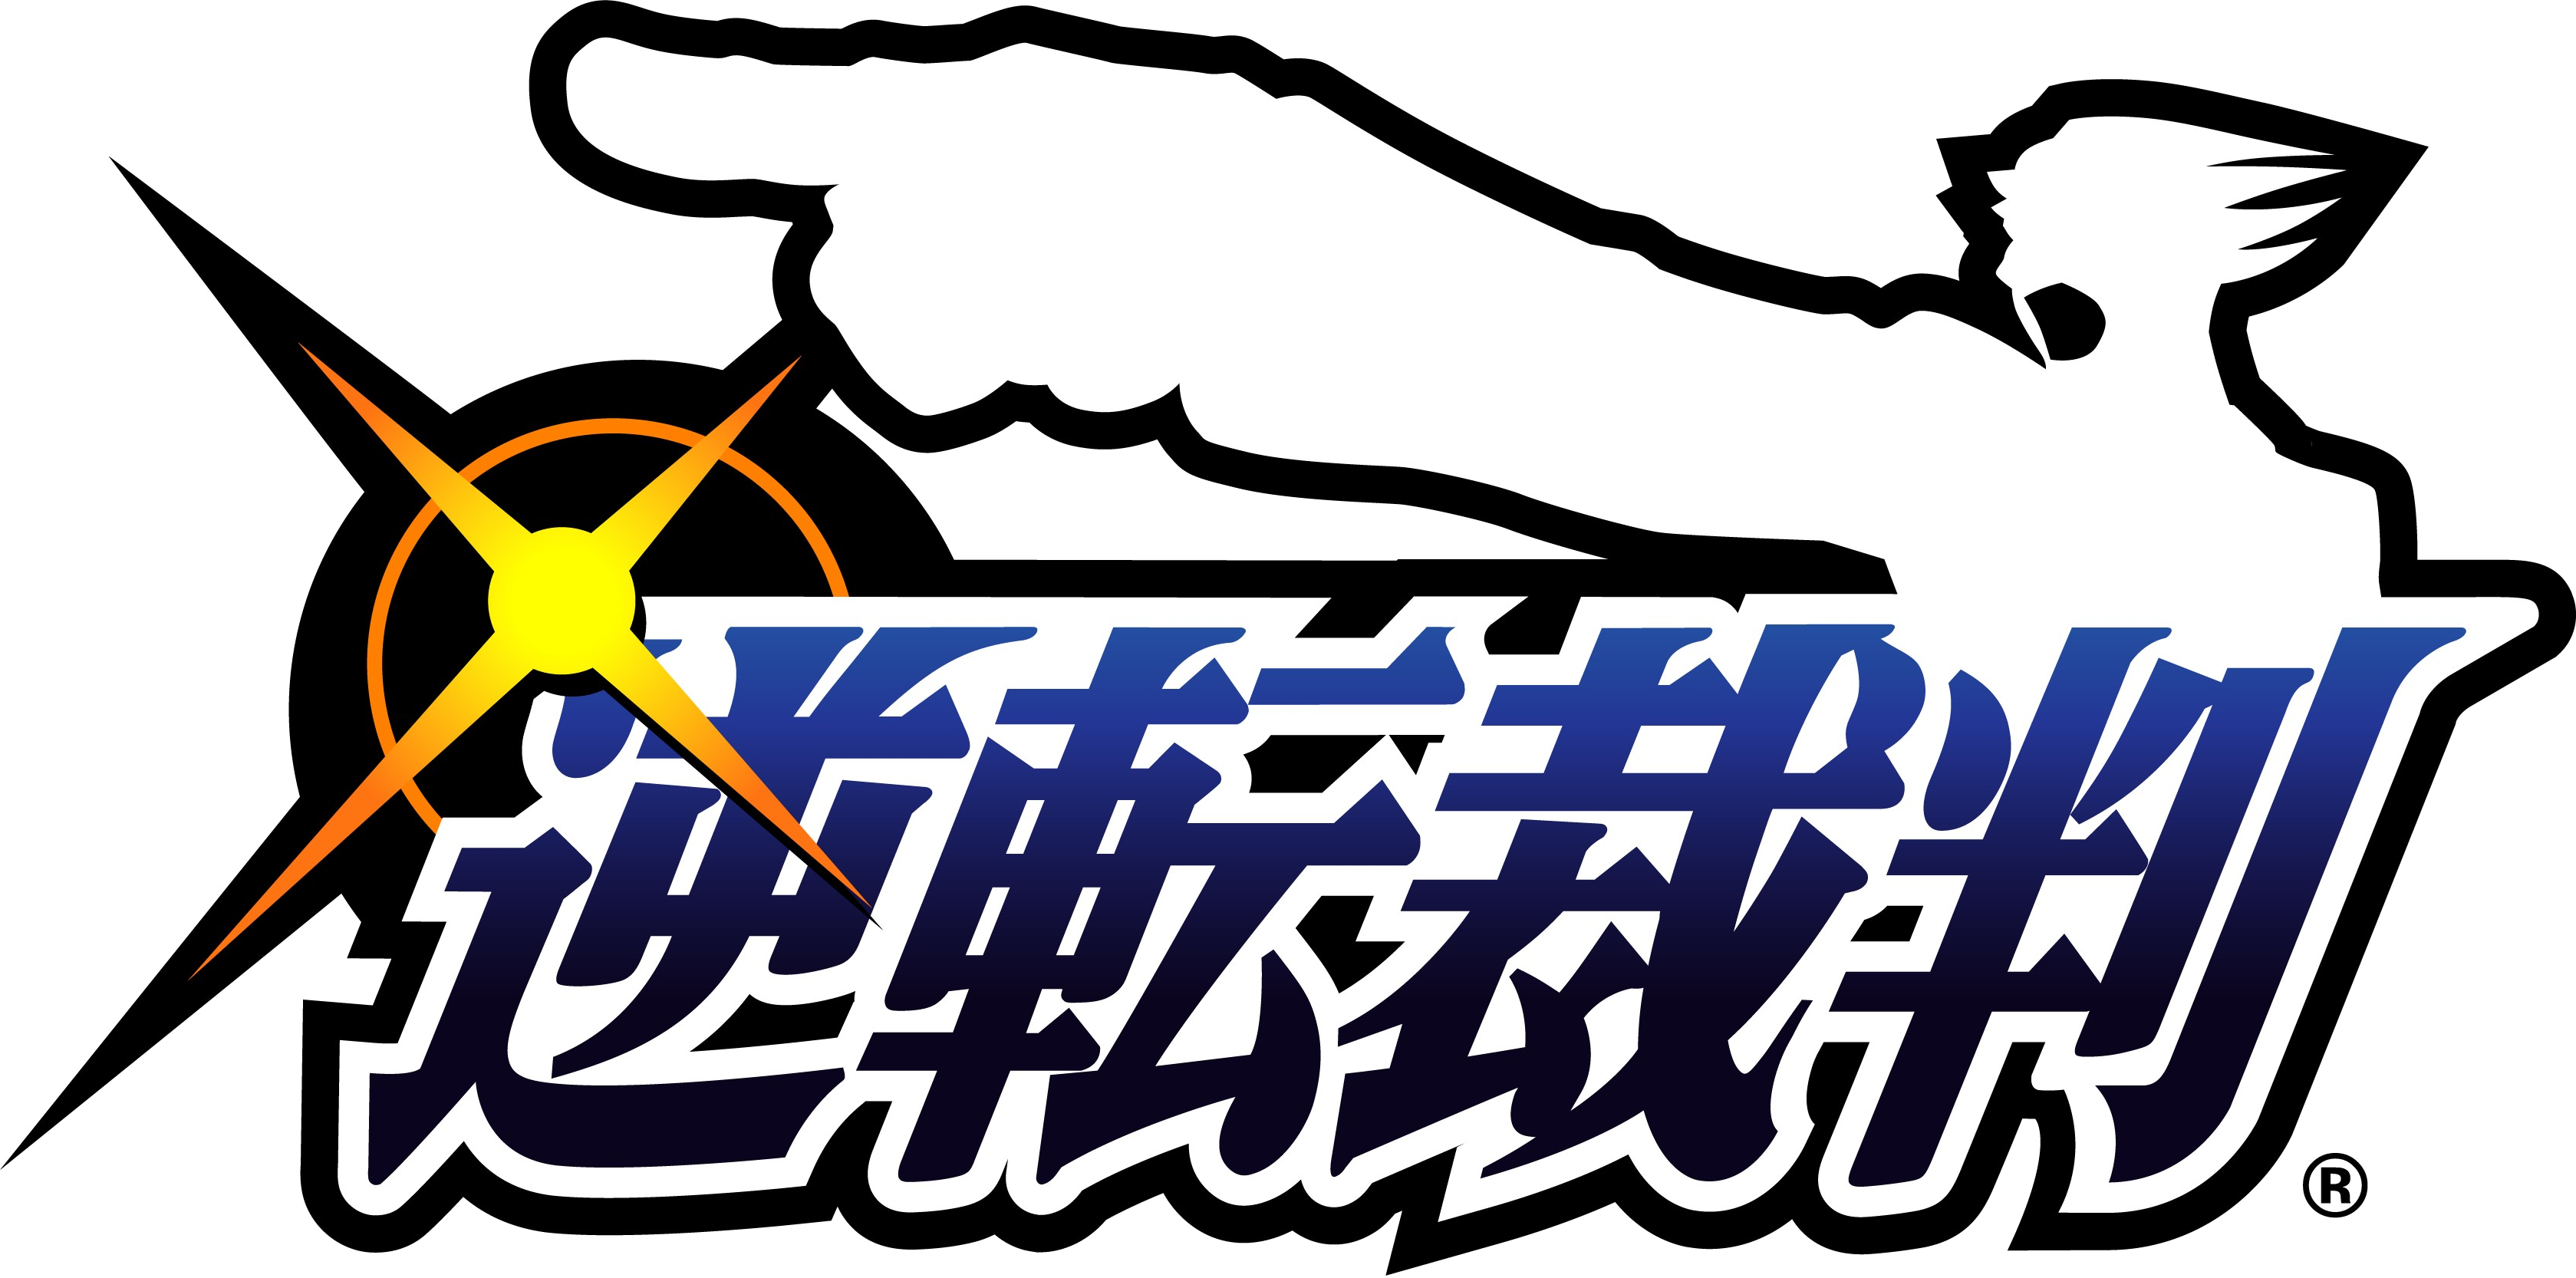 Ace Attorney - Ace Attorney Wiki: Ace Attorney, Administration of this  site, Blog posts, Copyright, Disambiguations, Events, Featured articles,  Files,  Saiban, Gyakuten Saiban 5, Berry, Deauxnim